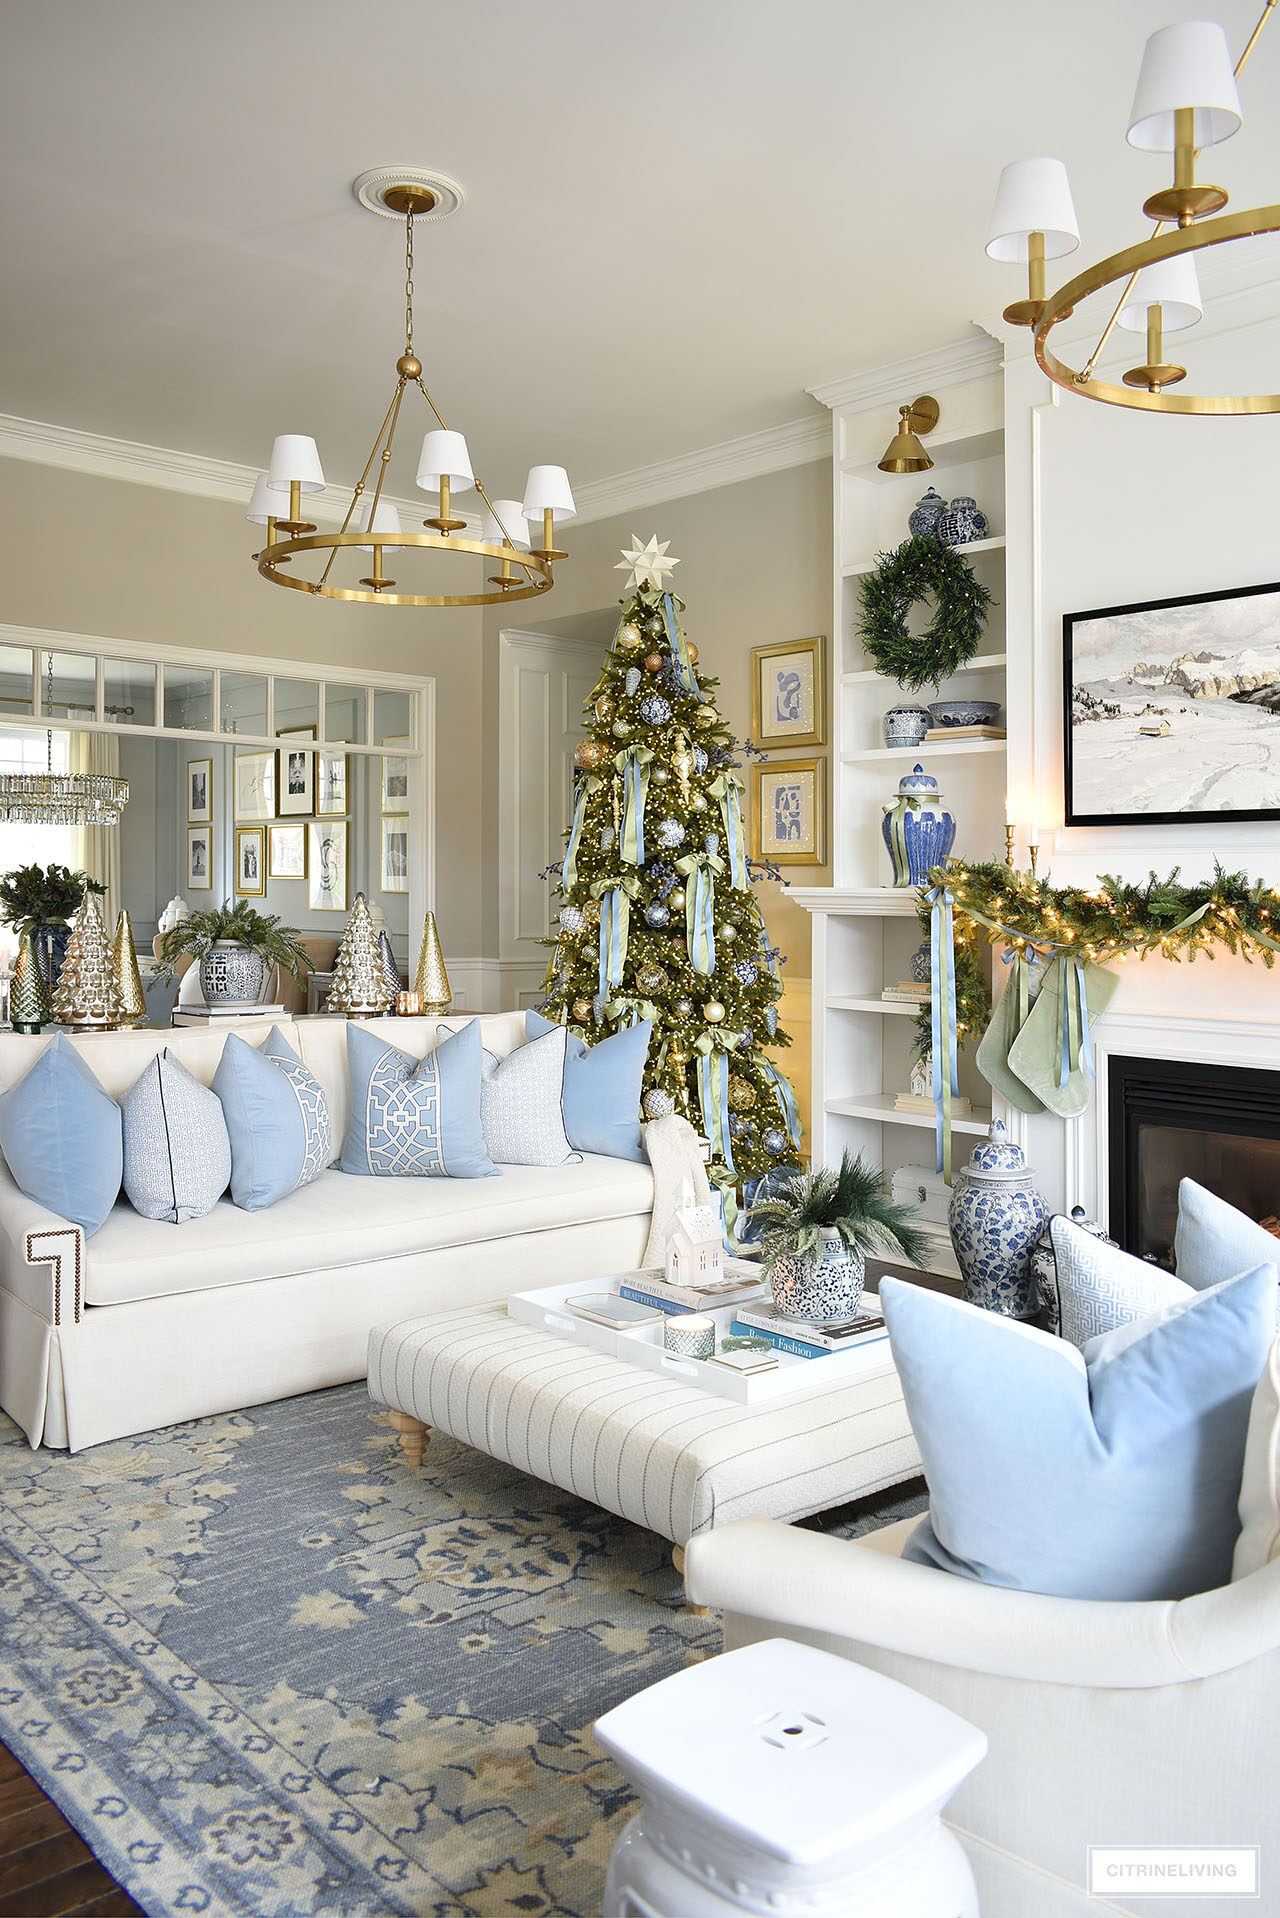 Christmas living room decorated in blue and green with green garland and ribbons on the mantel. Blue and white chinoiserie decor is styled throughout the room.